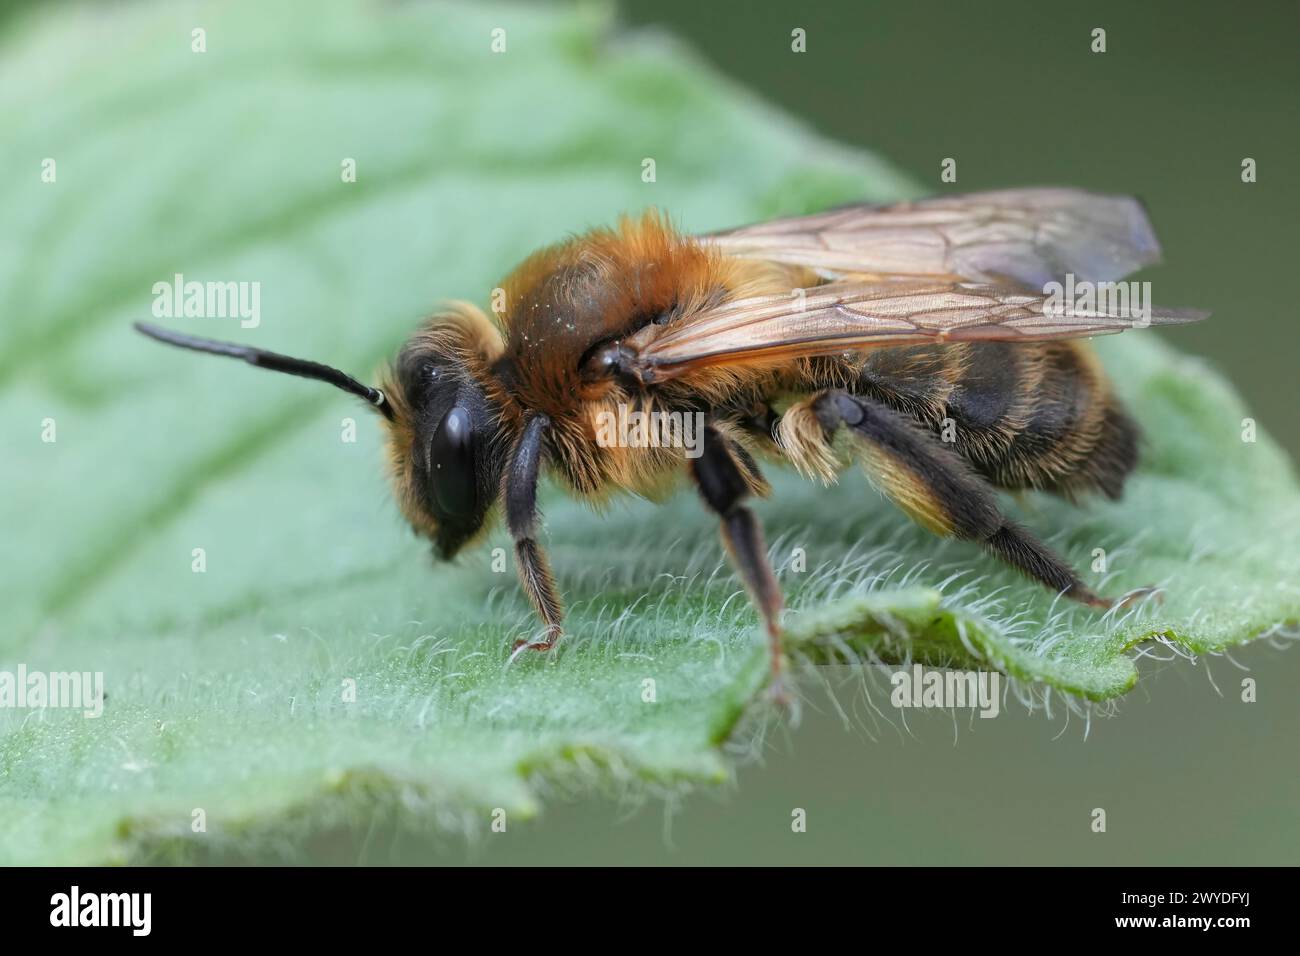 Natural closeup on a brown hairy female Choclate mining bee, Andrena scotica sitting on a green leaf Stock Photo